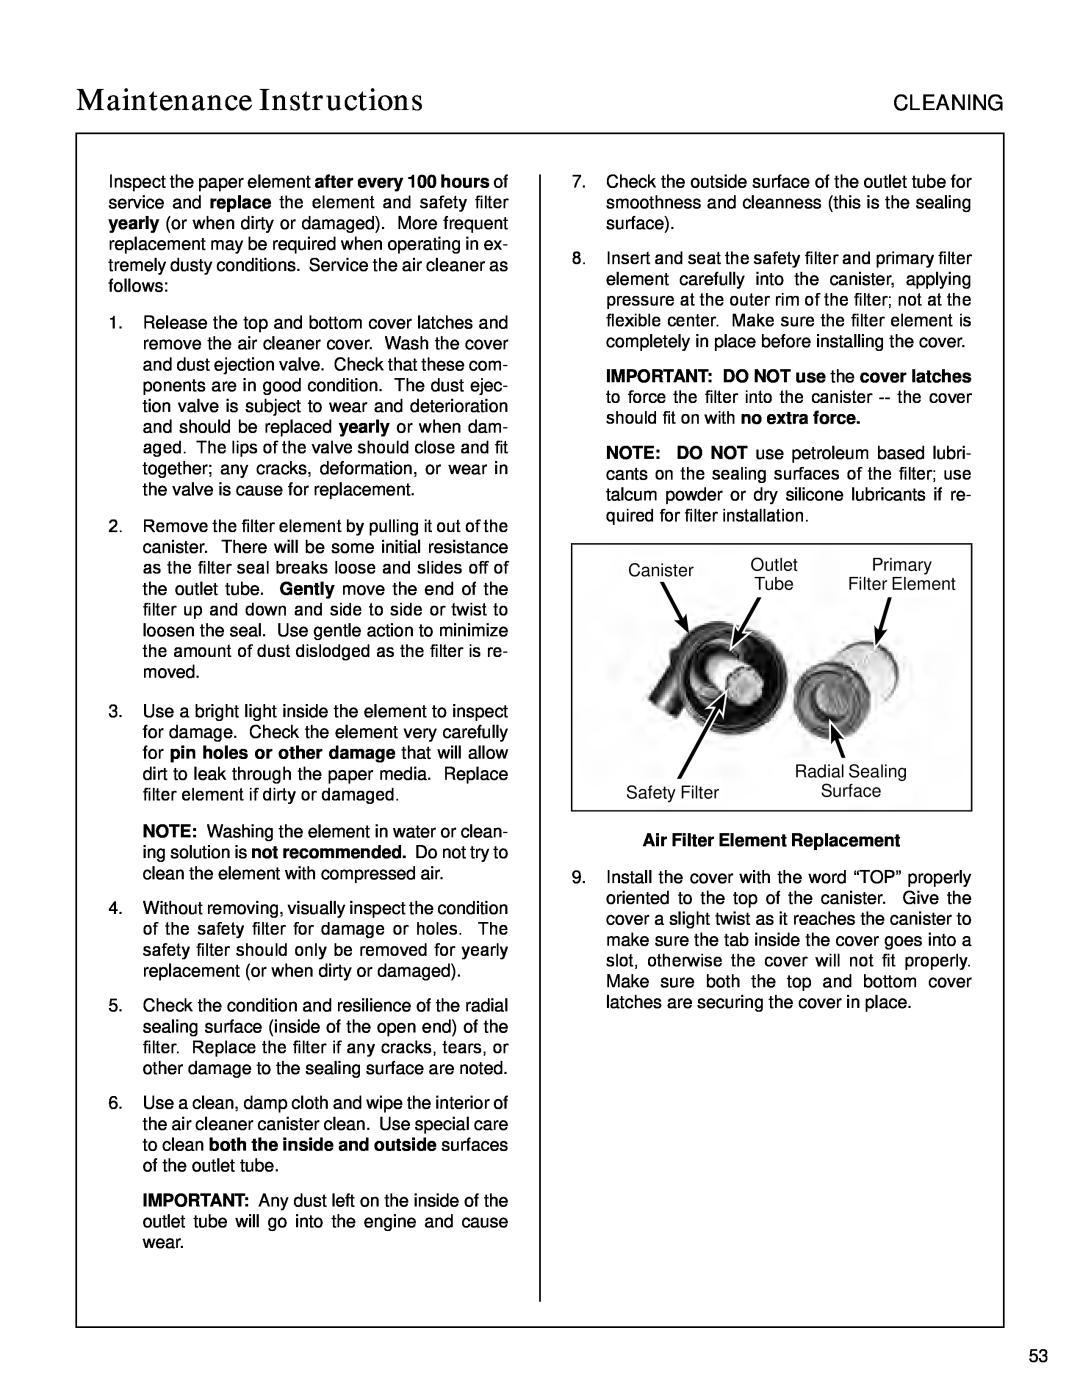 Walker S14 manual Air Filter Element Replacement, Maintenance Instructions, Cleaning 